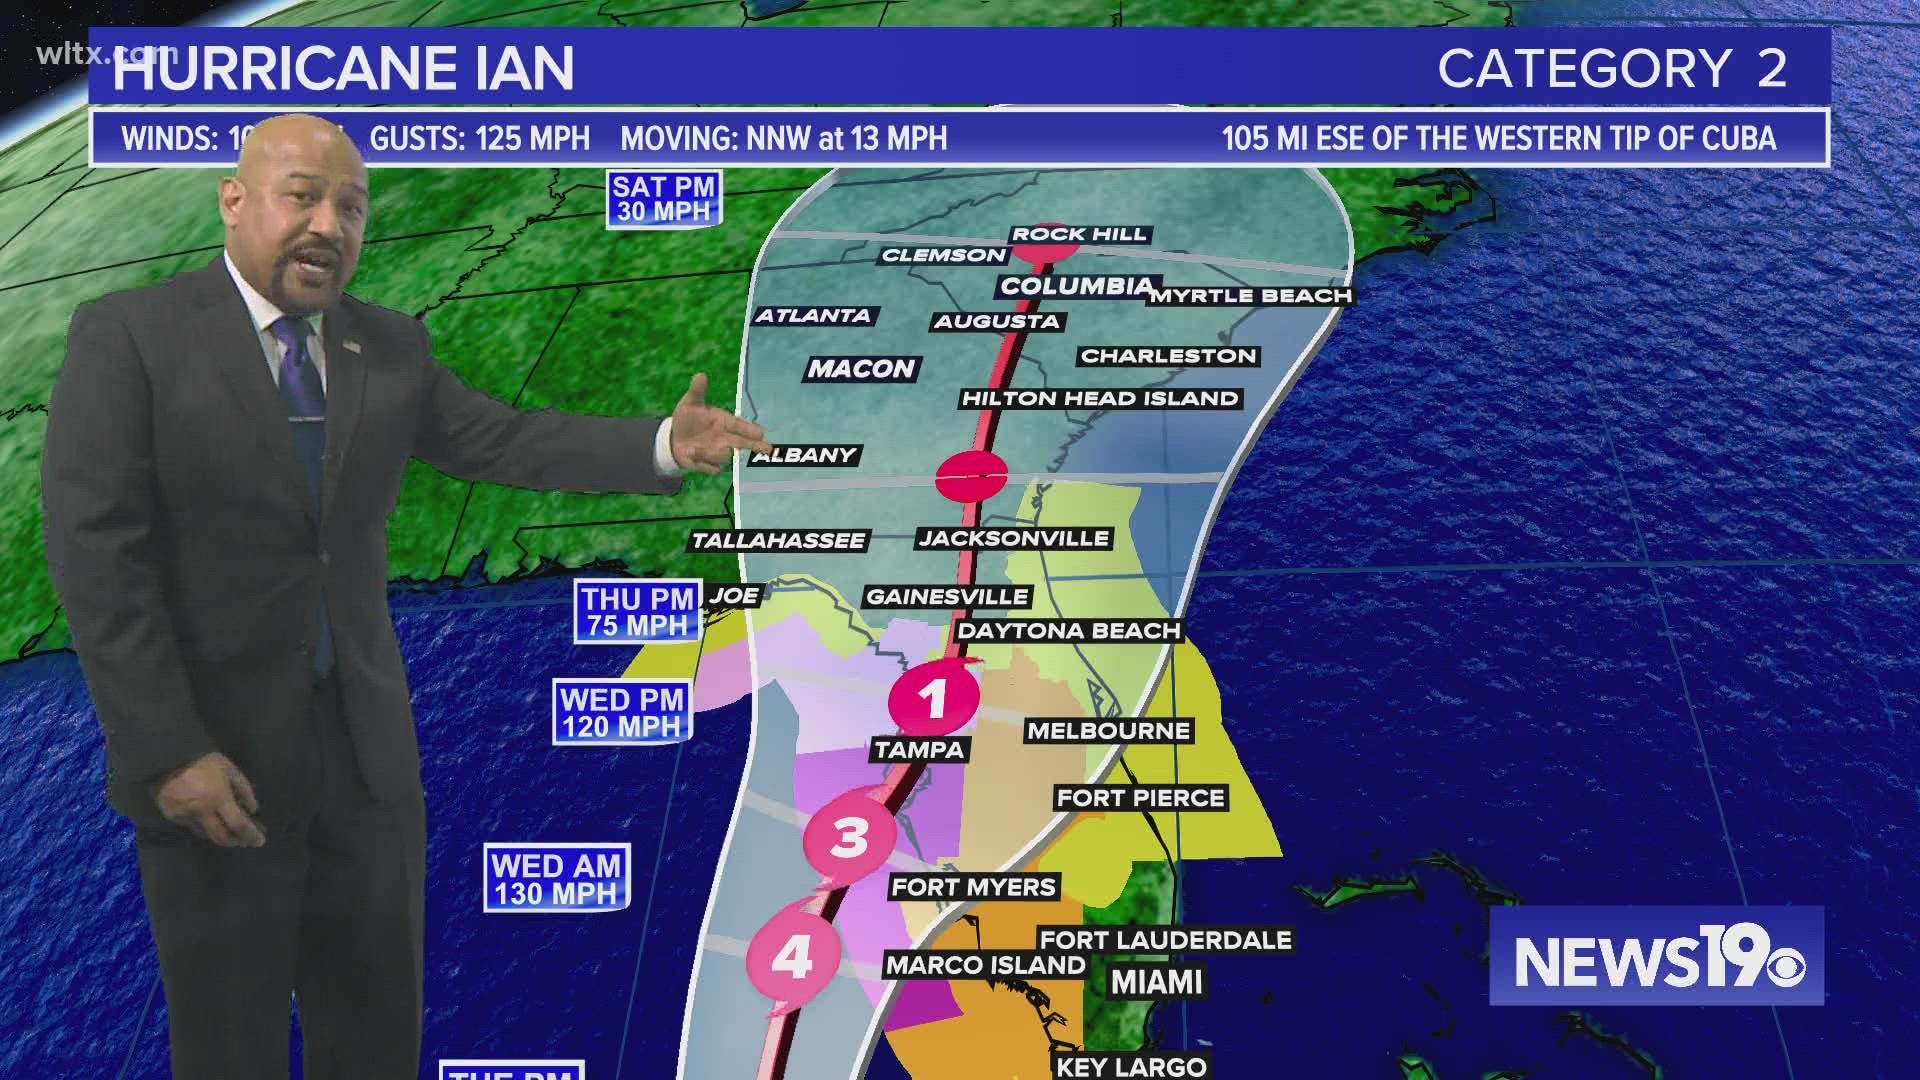 Officials say South Carolina residents should keep up with developments on Hurricane Ian, as the storm is expected to affect our weather Friday and Saturday.